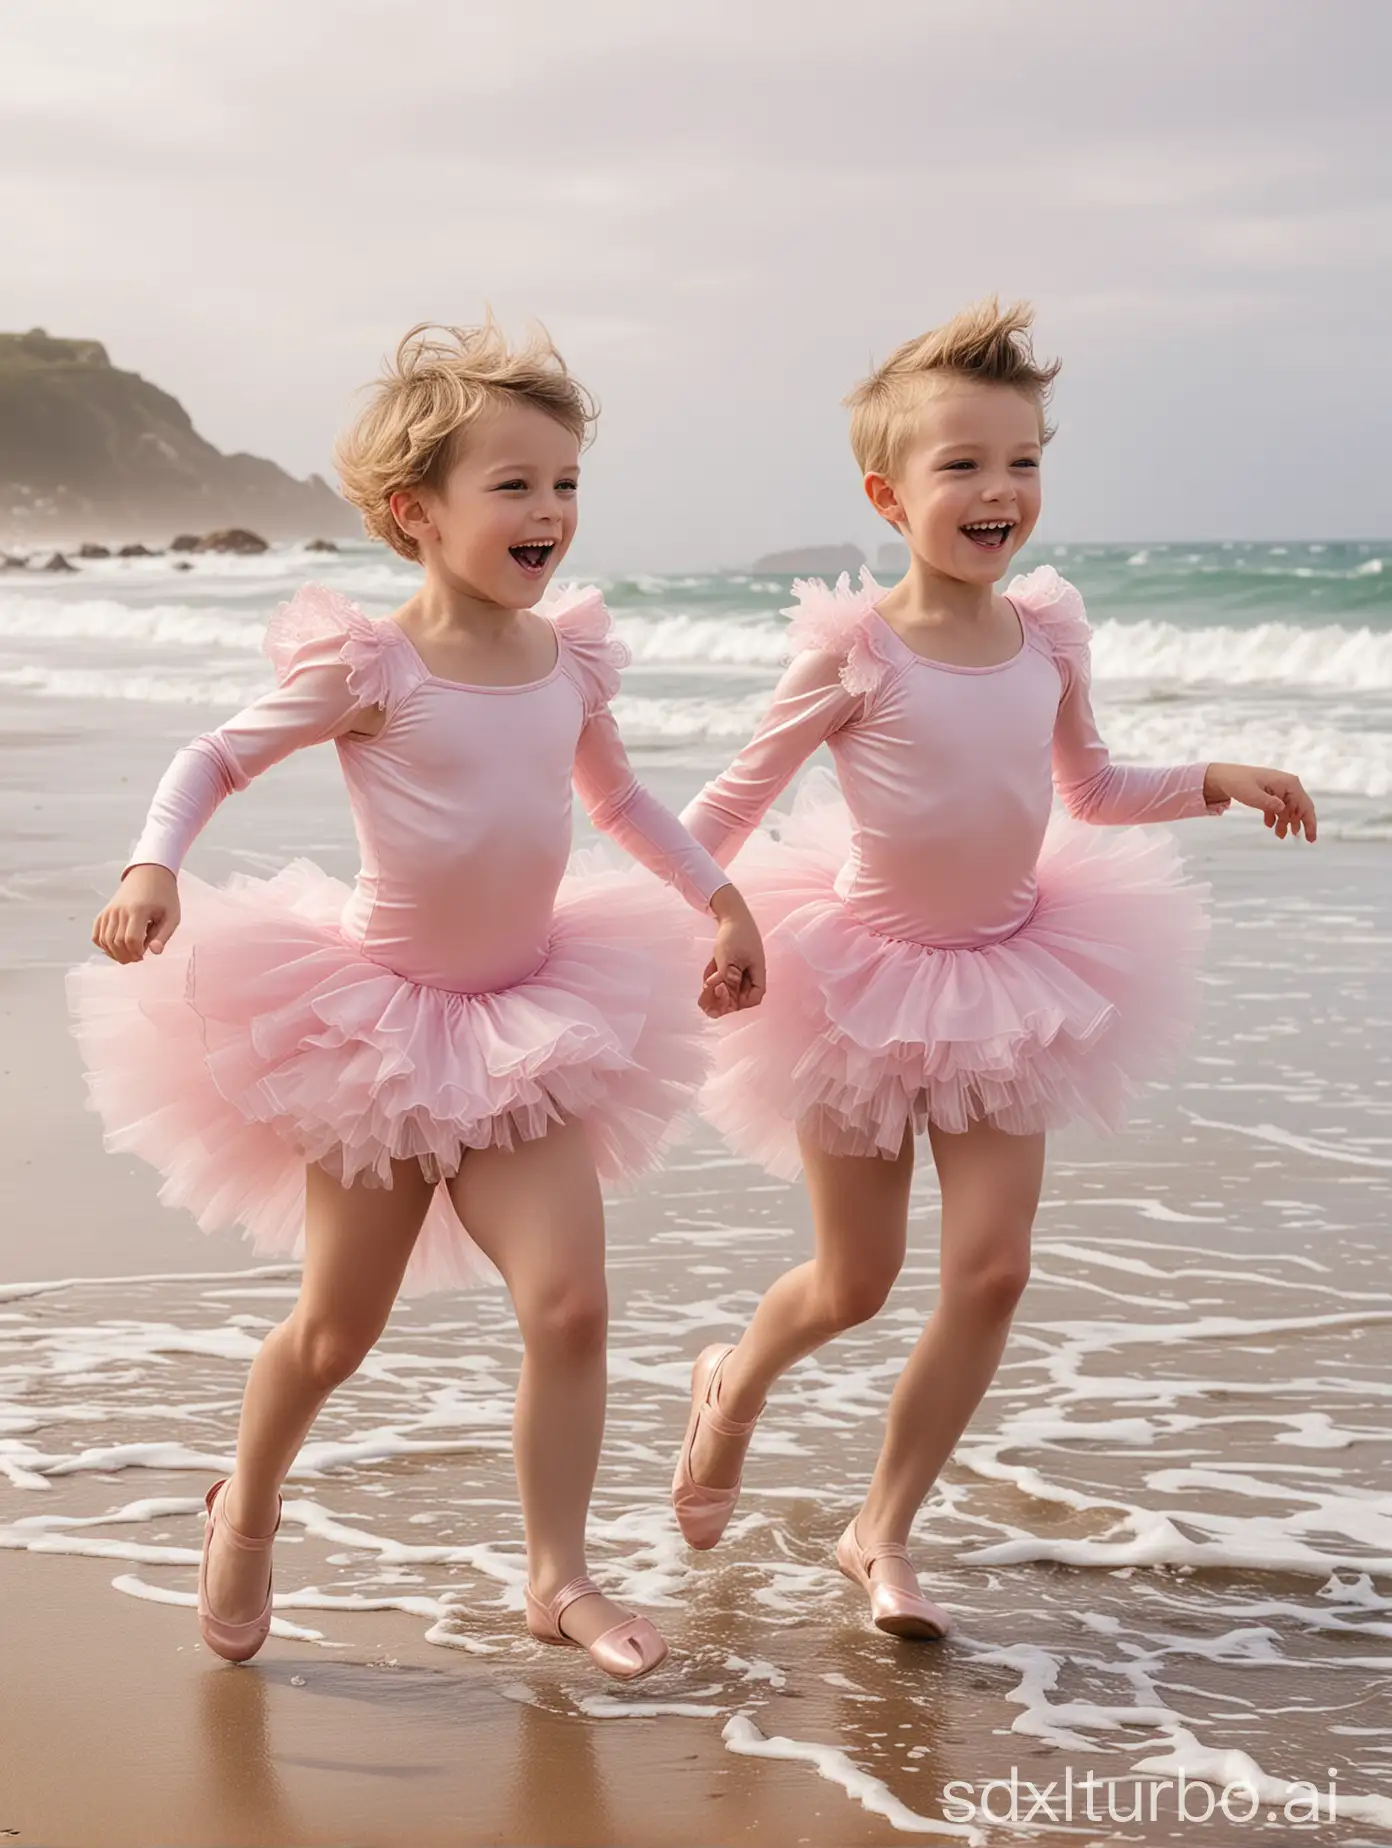 (((Gender role reversal)))), photograph of two short-haired 8-year-old boys running excitedly along a beach shoreline in silky pink ballerina leotards with long frilly sleeves and frilly tutus, short smart hair in a quiff shaved on the sides, energetic